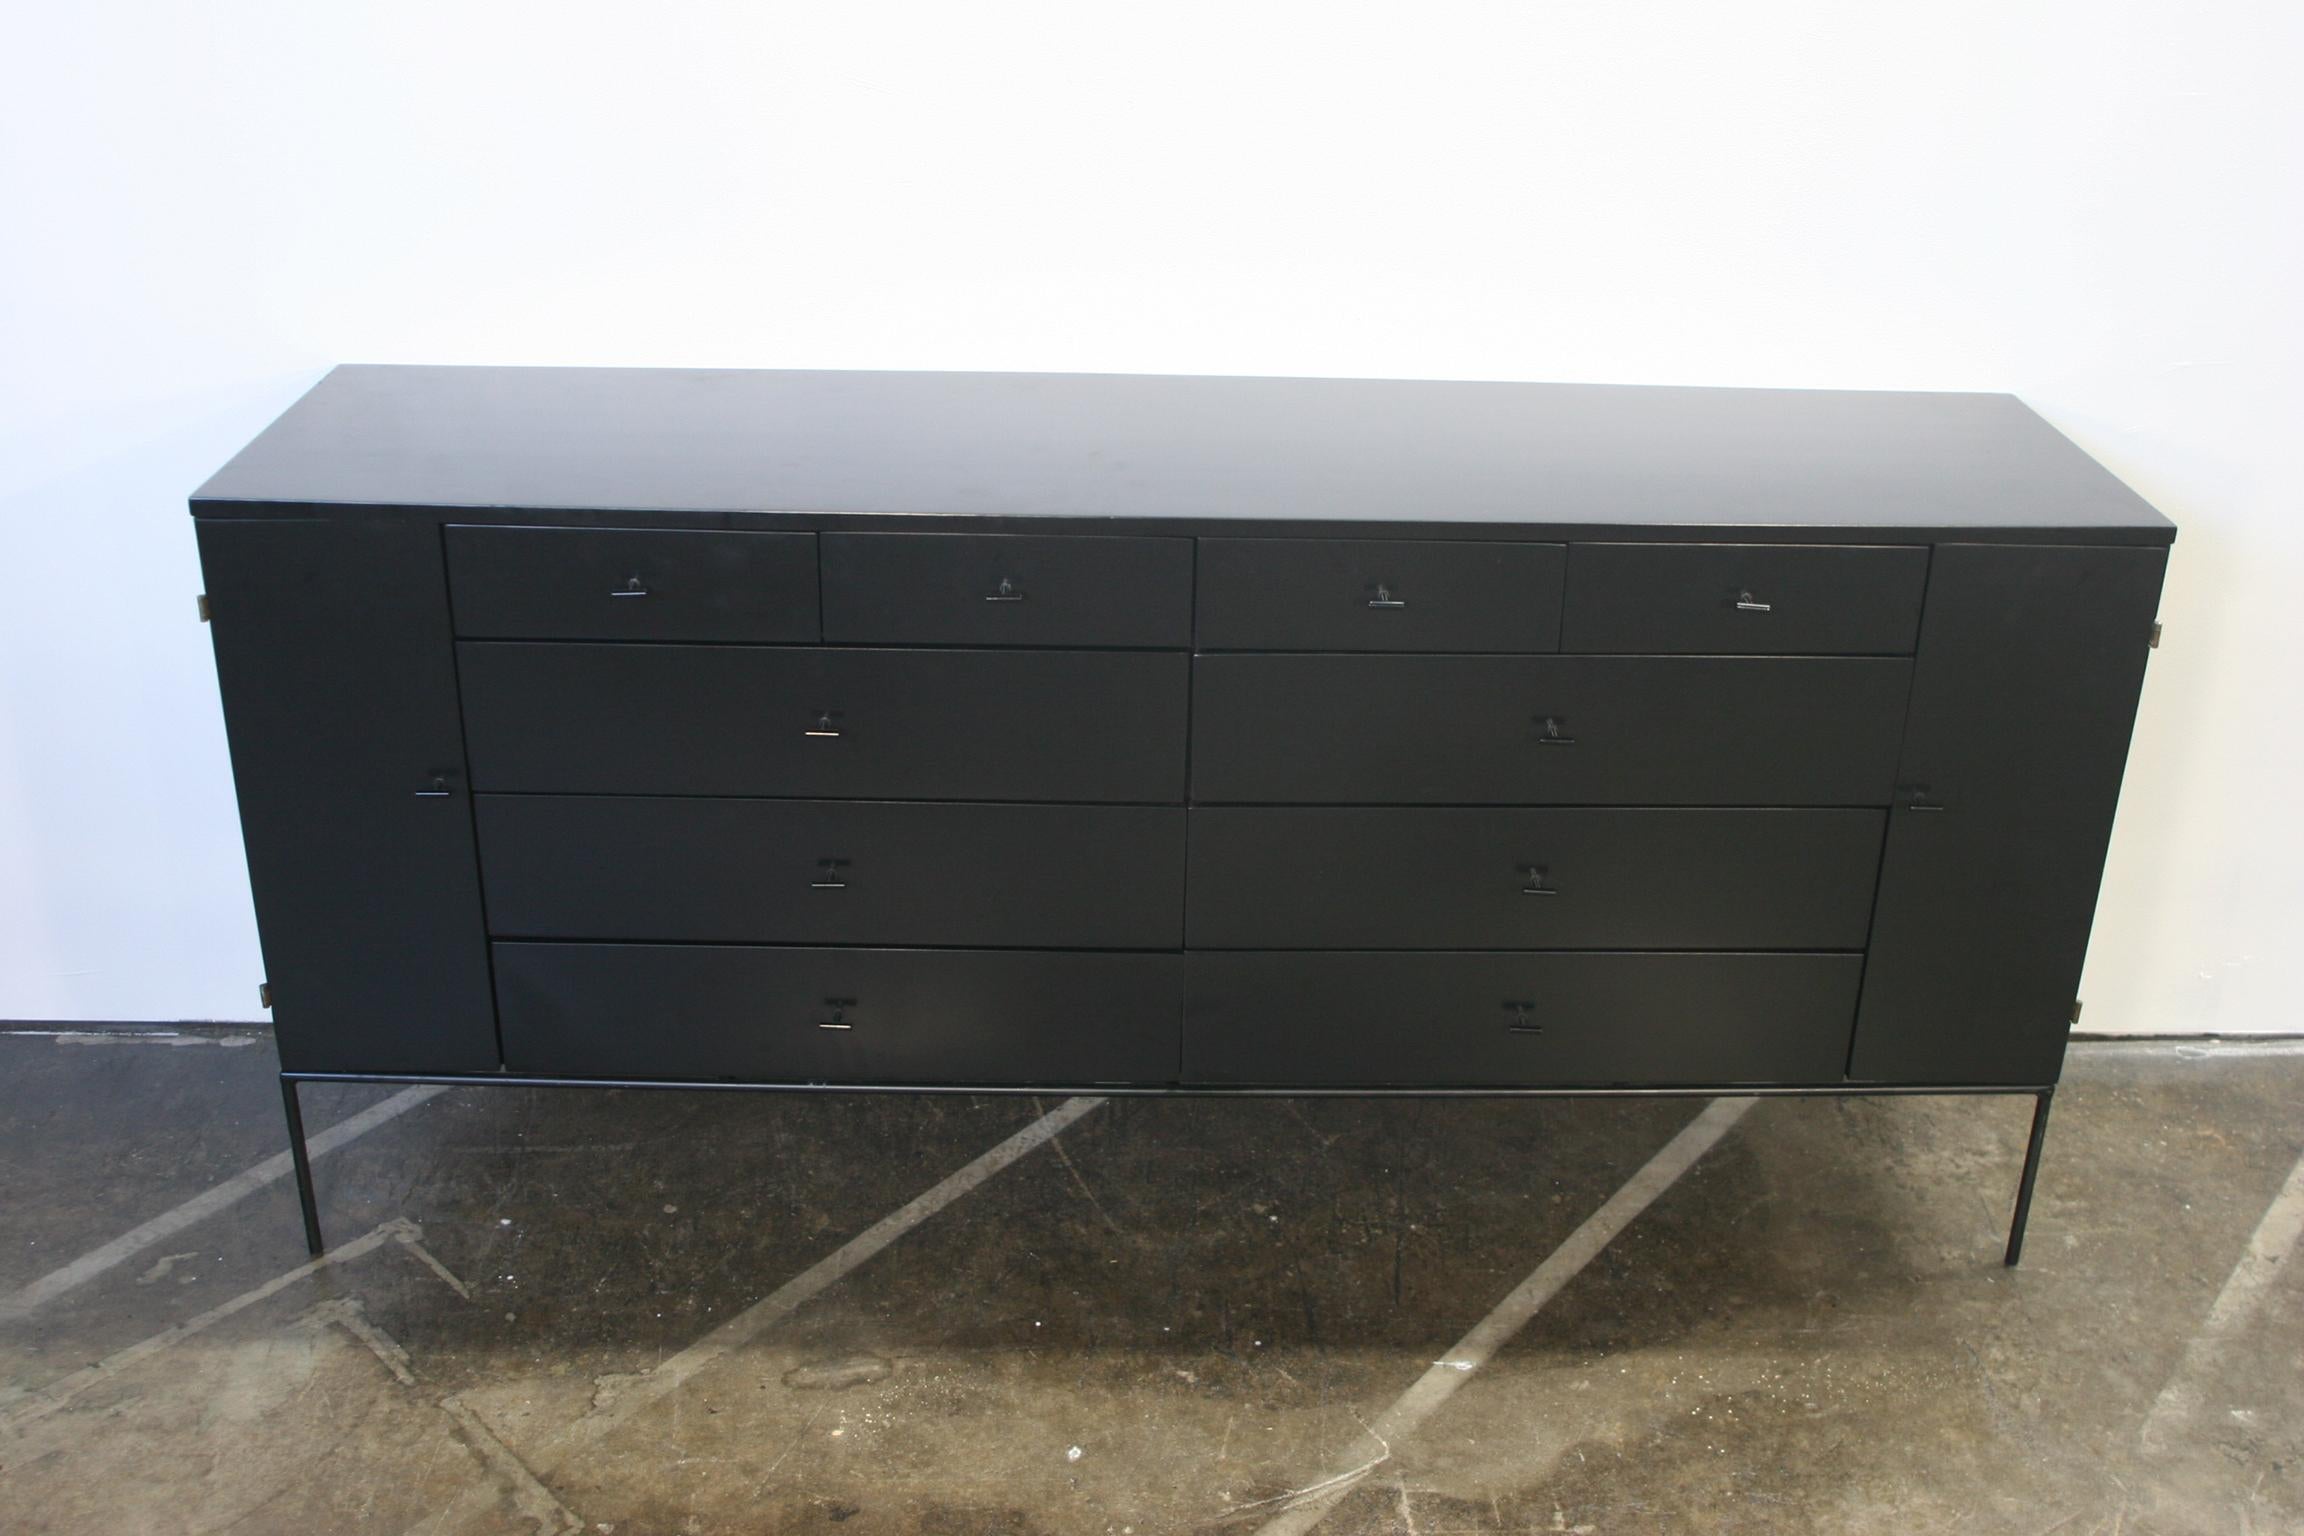 Midcentury American designer Paul Mccobb 20-drawer dresser or credenza - Planner Group line #1510 rare - all black lacquer finish steel T pull knobs. Newly professionally sprayed lacquer black - original all solid maple construction - iron base with